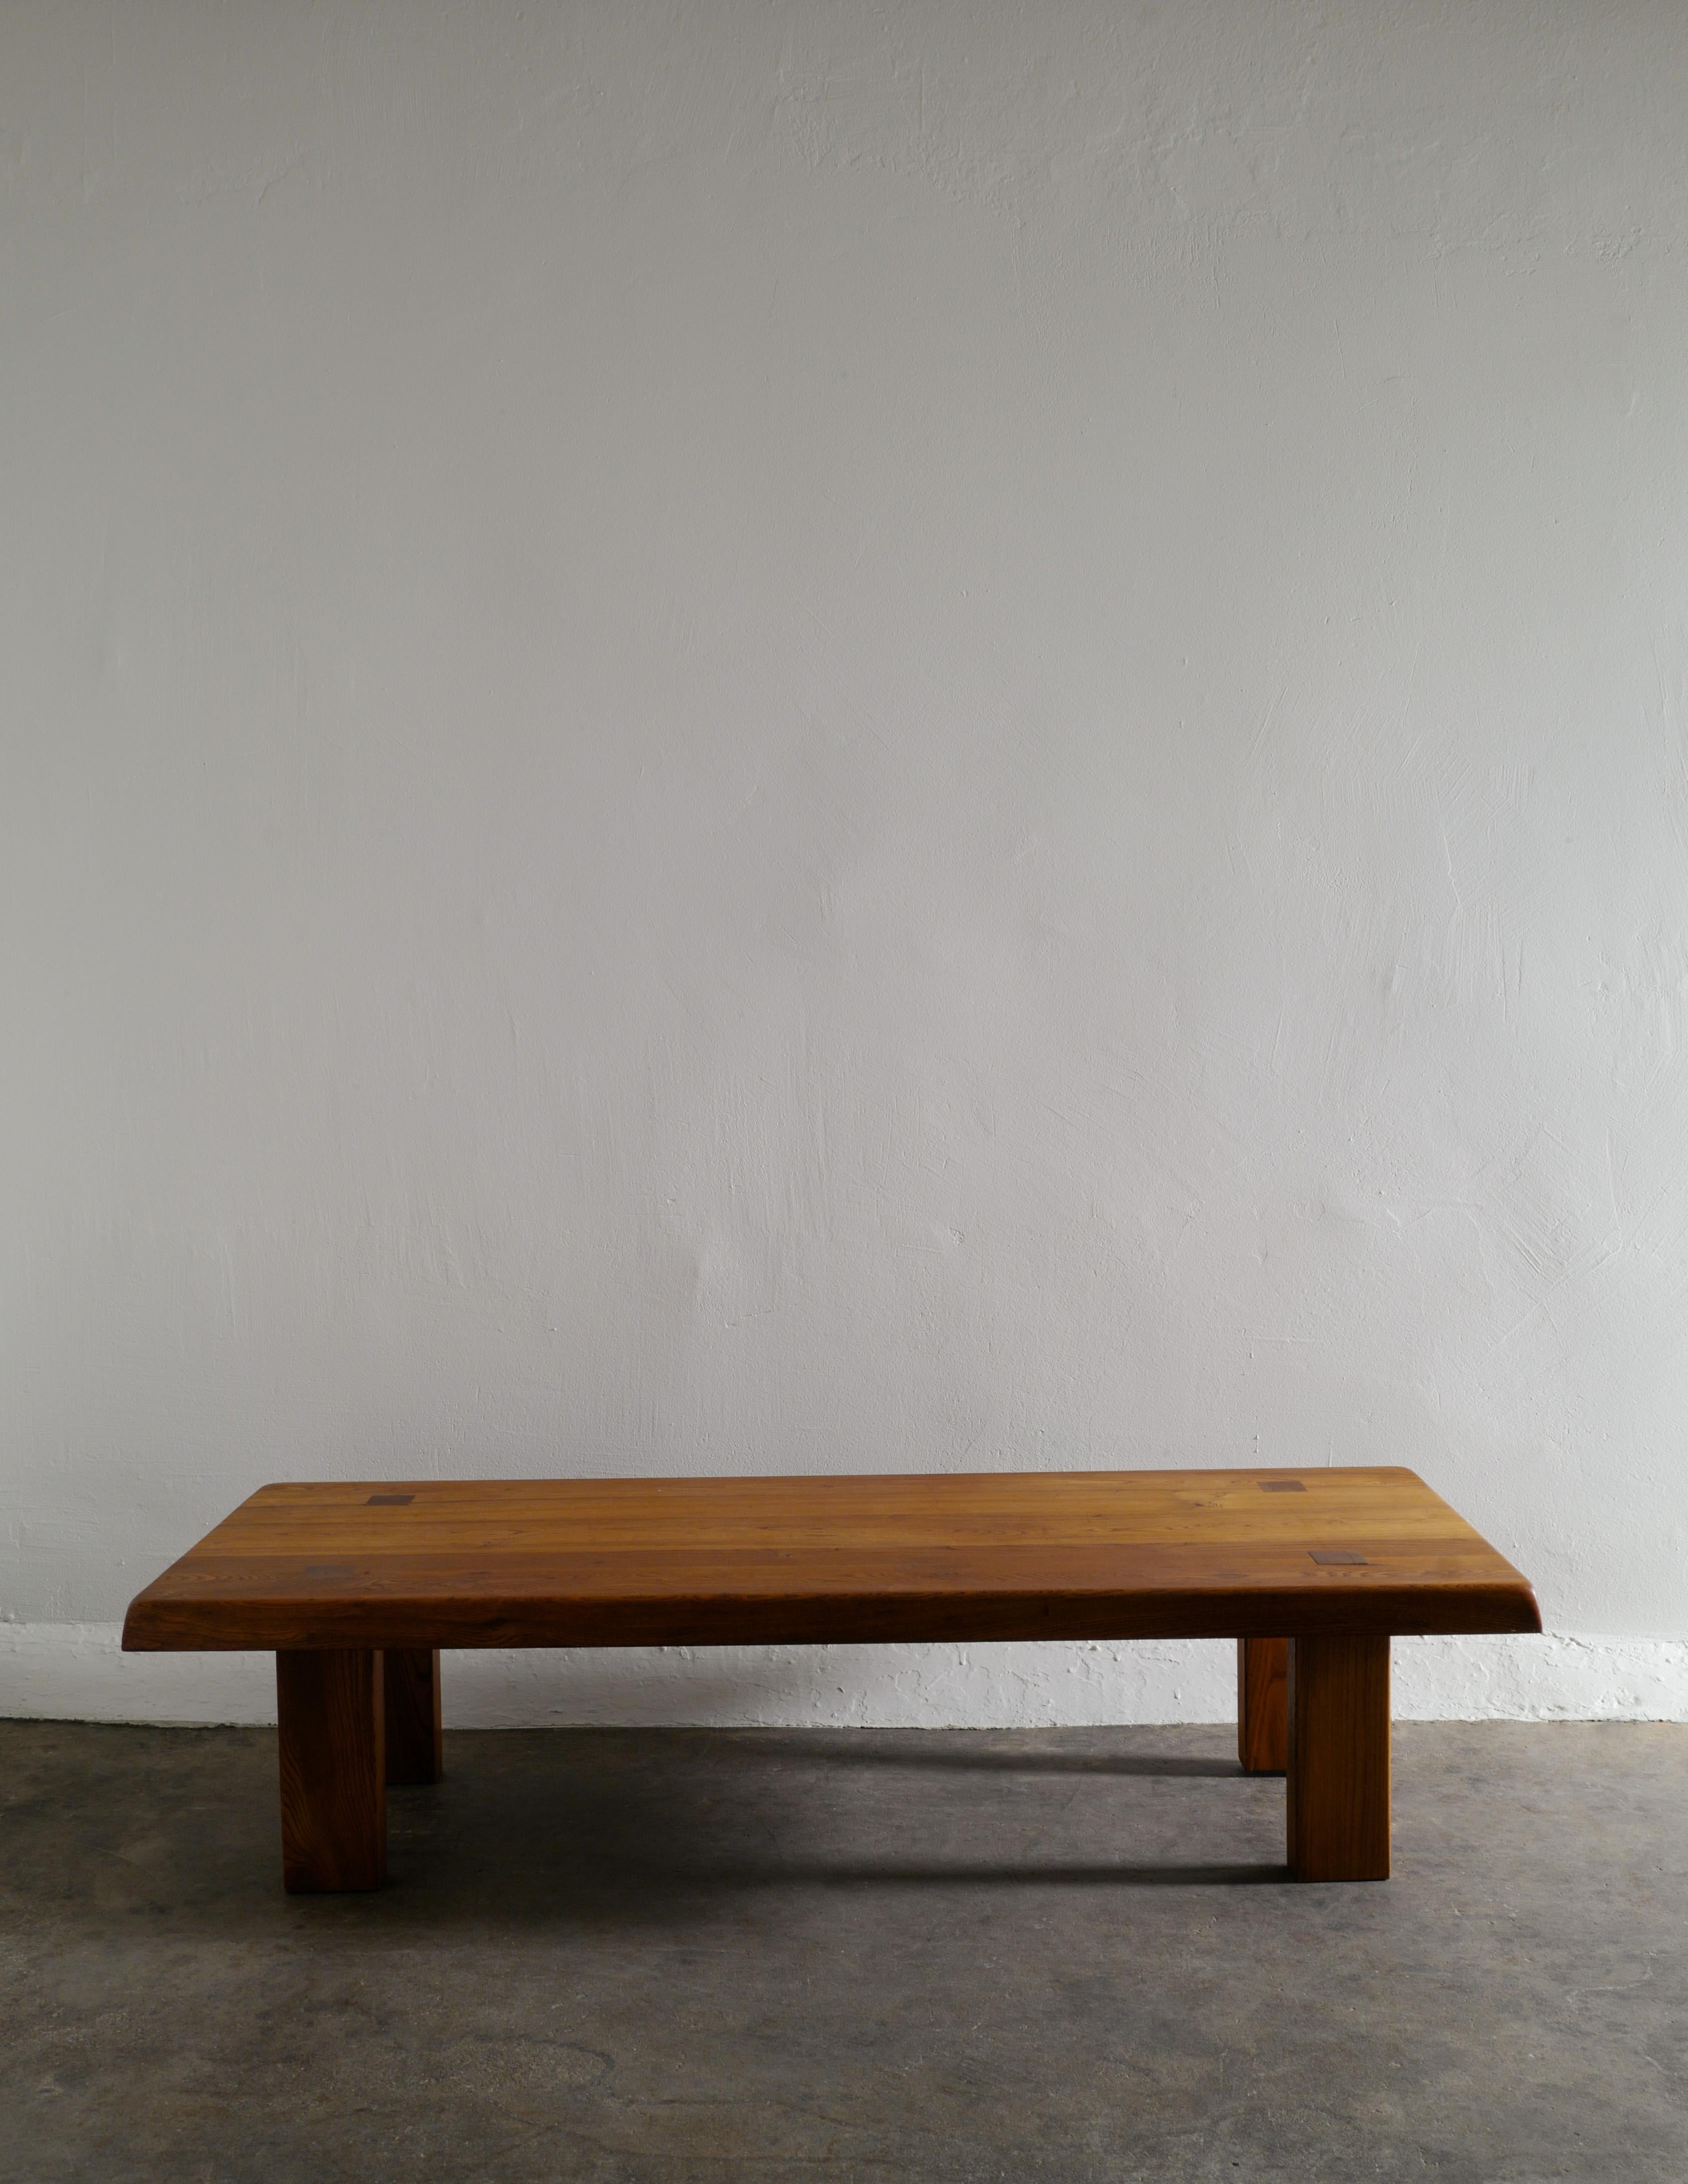 Rare soda coffee table in solid elm designed by Pierre Chapo and produced in France in the late 1960s. In good vintage and original condition with signs and patina from age and use. A great and iconic coffee table. 

Dimensions: H: 34 cm W: 140 cm